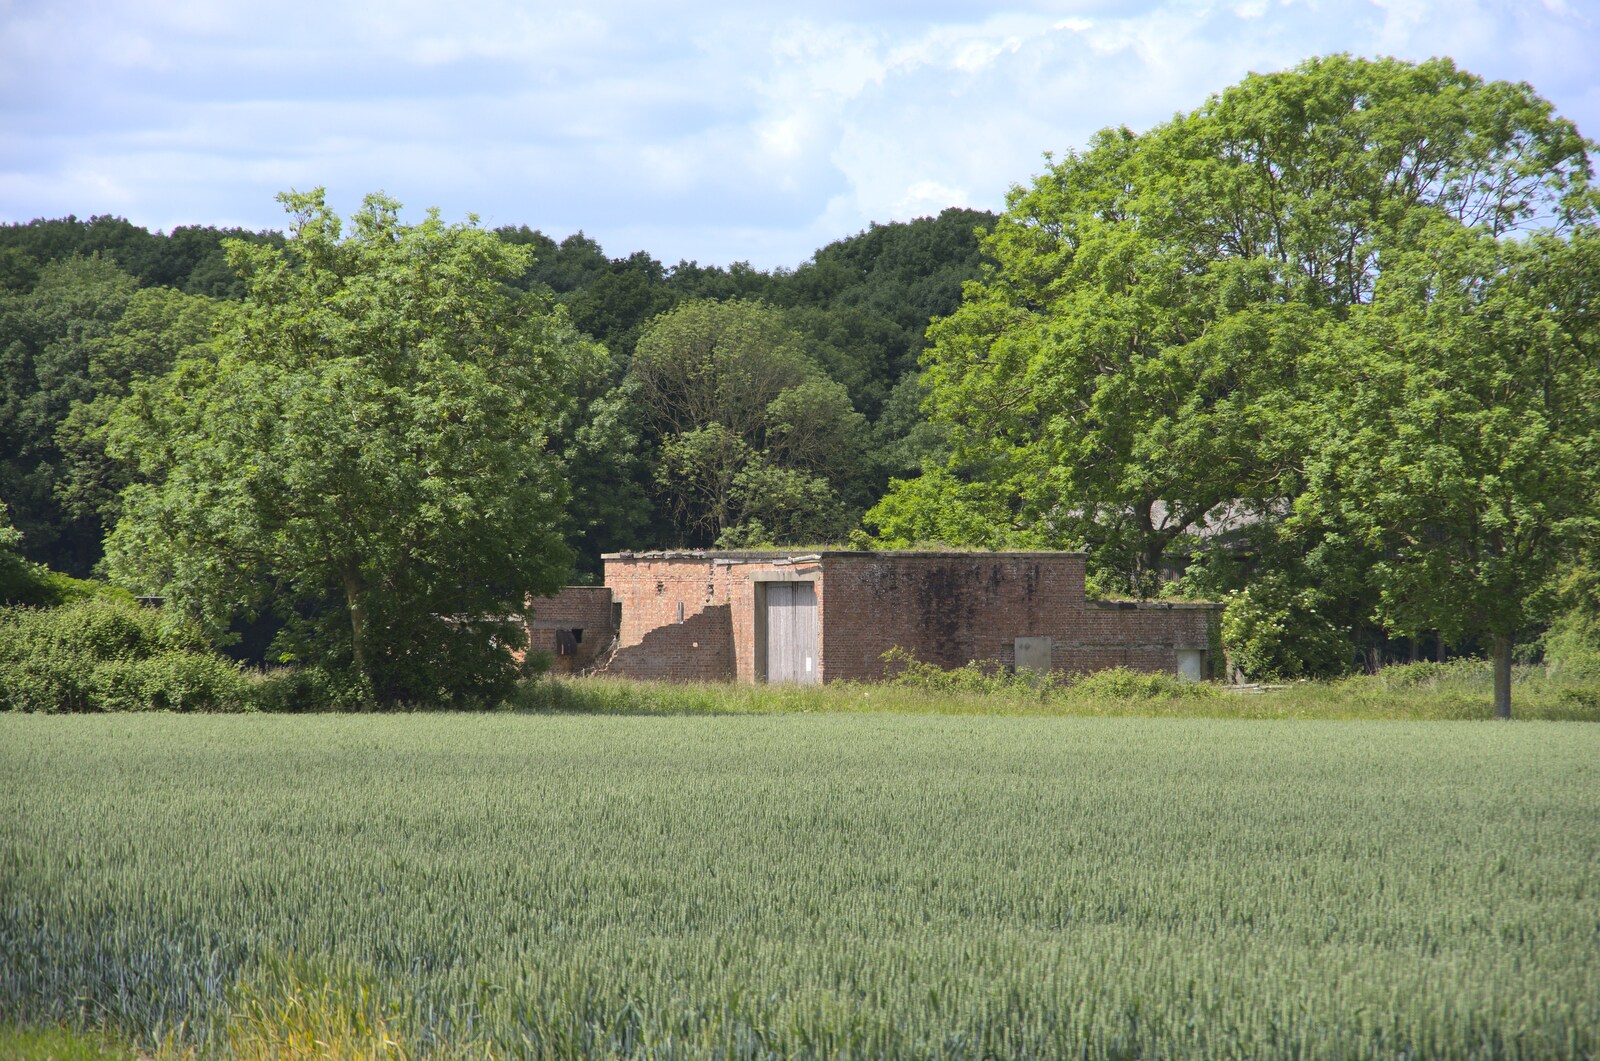 The last remaining building on the old airfield from A 1940s Timewarp, Site 4, Bungay Airfield, Flixton, Suffolk - 9th June 2022